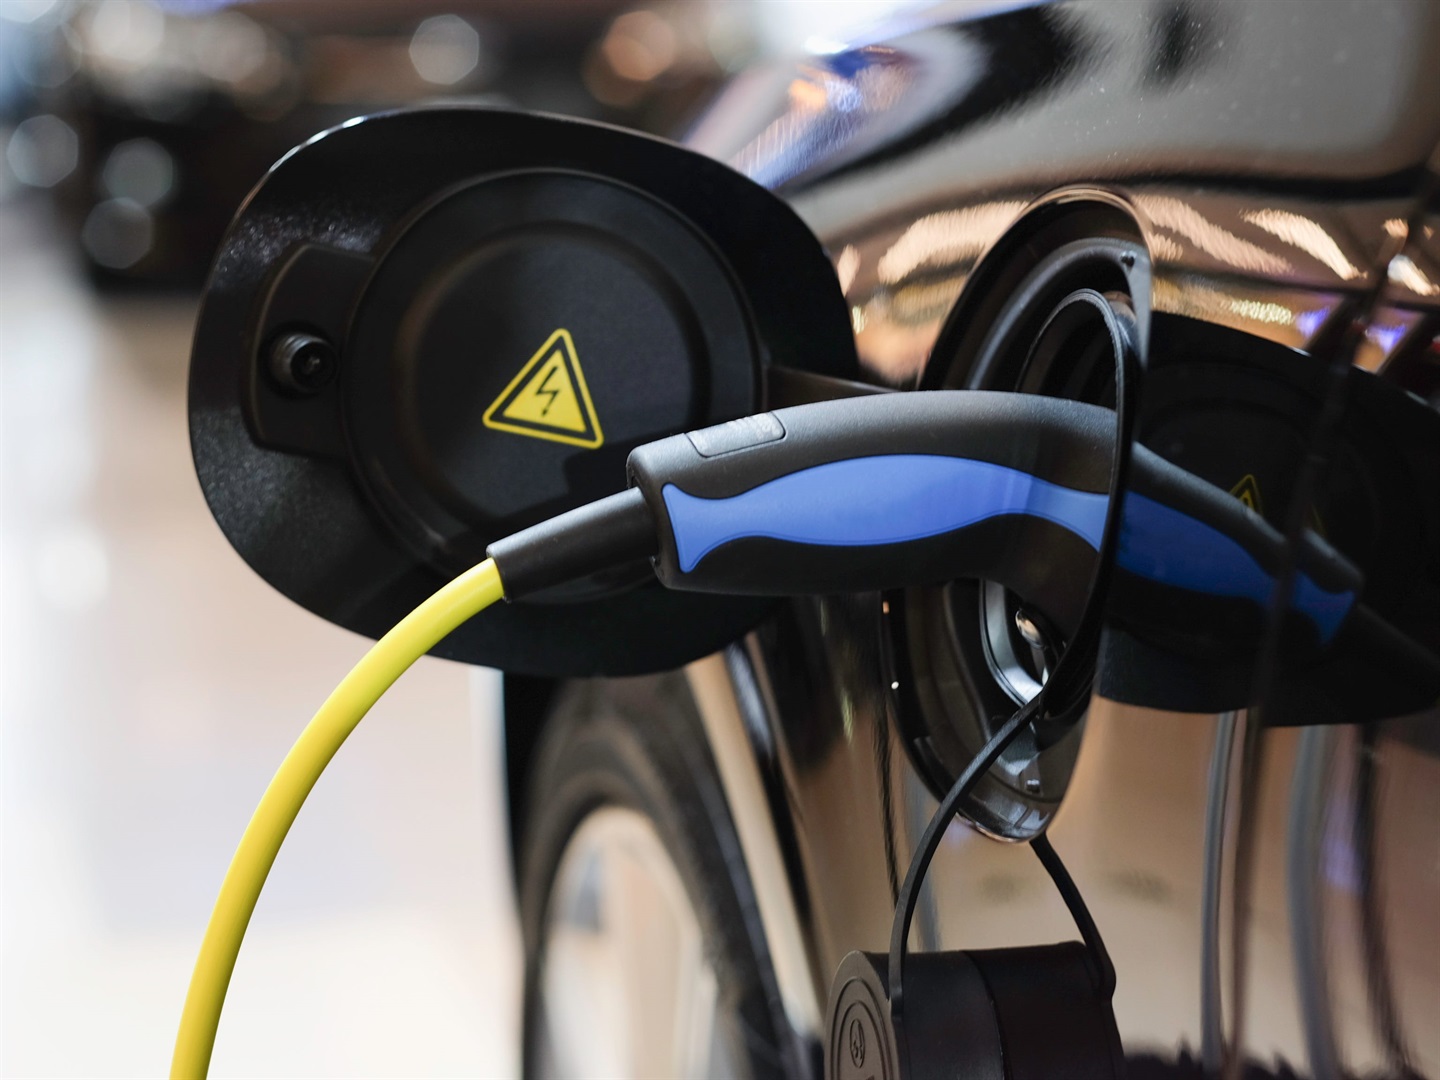 New electric vehicle charging research could allow drivers to power